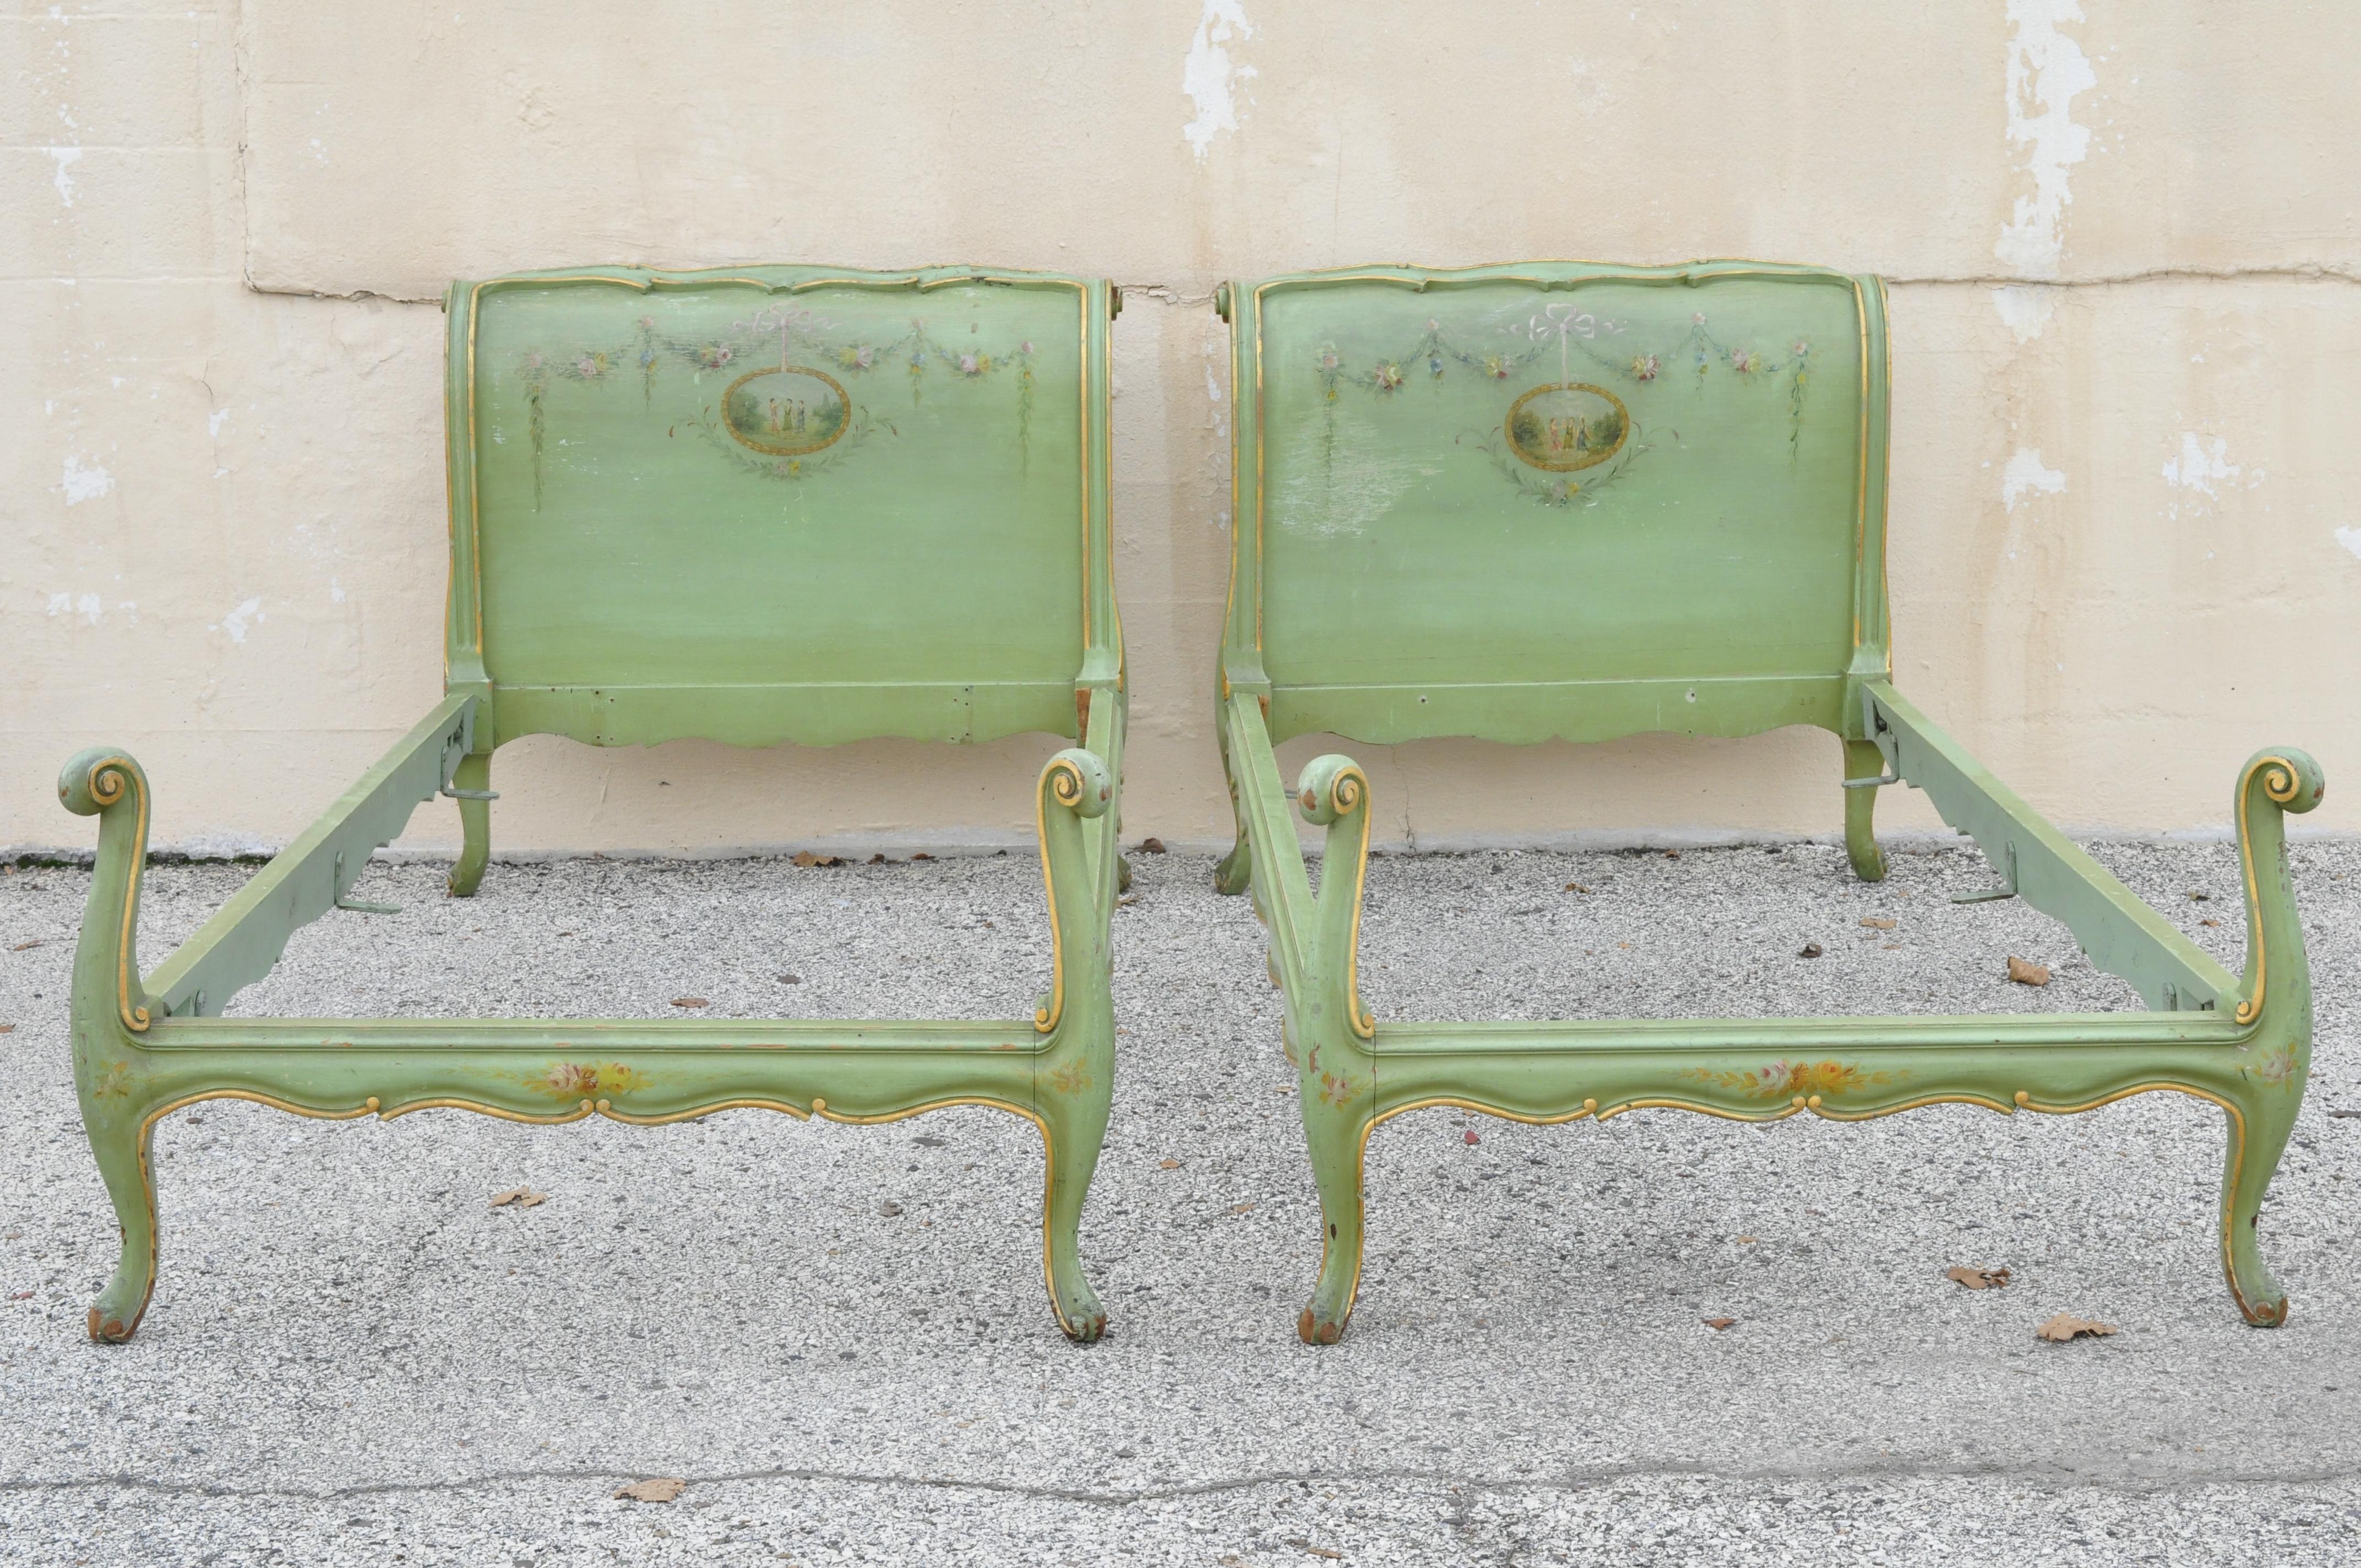 Pair of antique French Louis XV style green distress painted European twin bed frames. Beds are European twin / single bed size and feature distressed finish, cabriole legs, very nice antique form, circa early 20th century. Measurements: 37